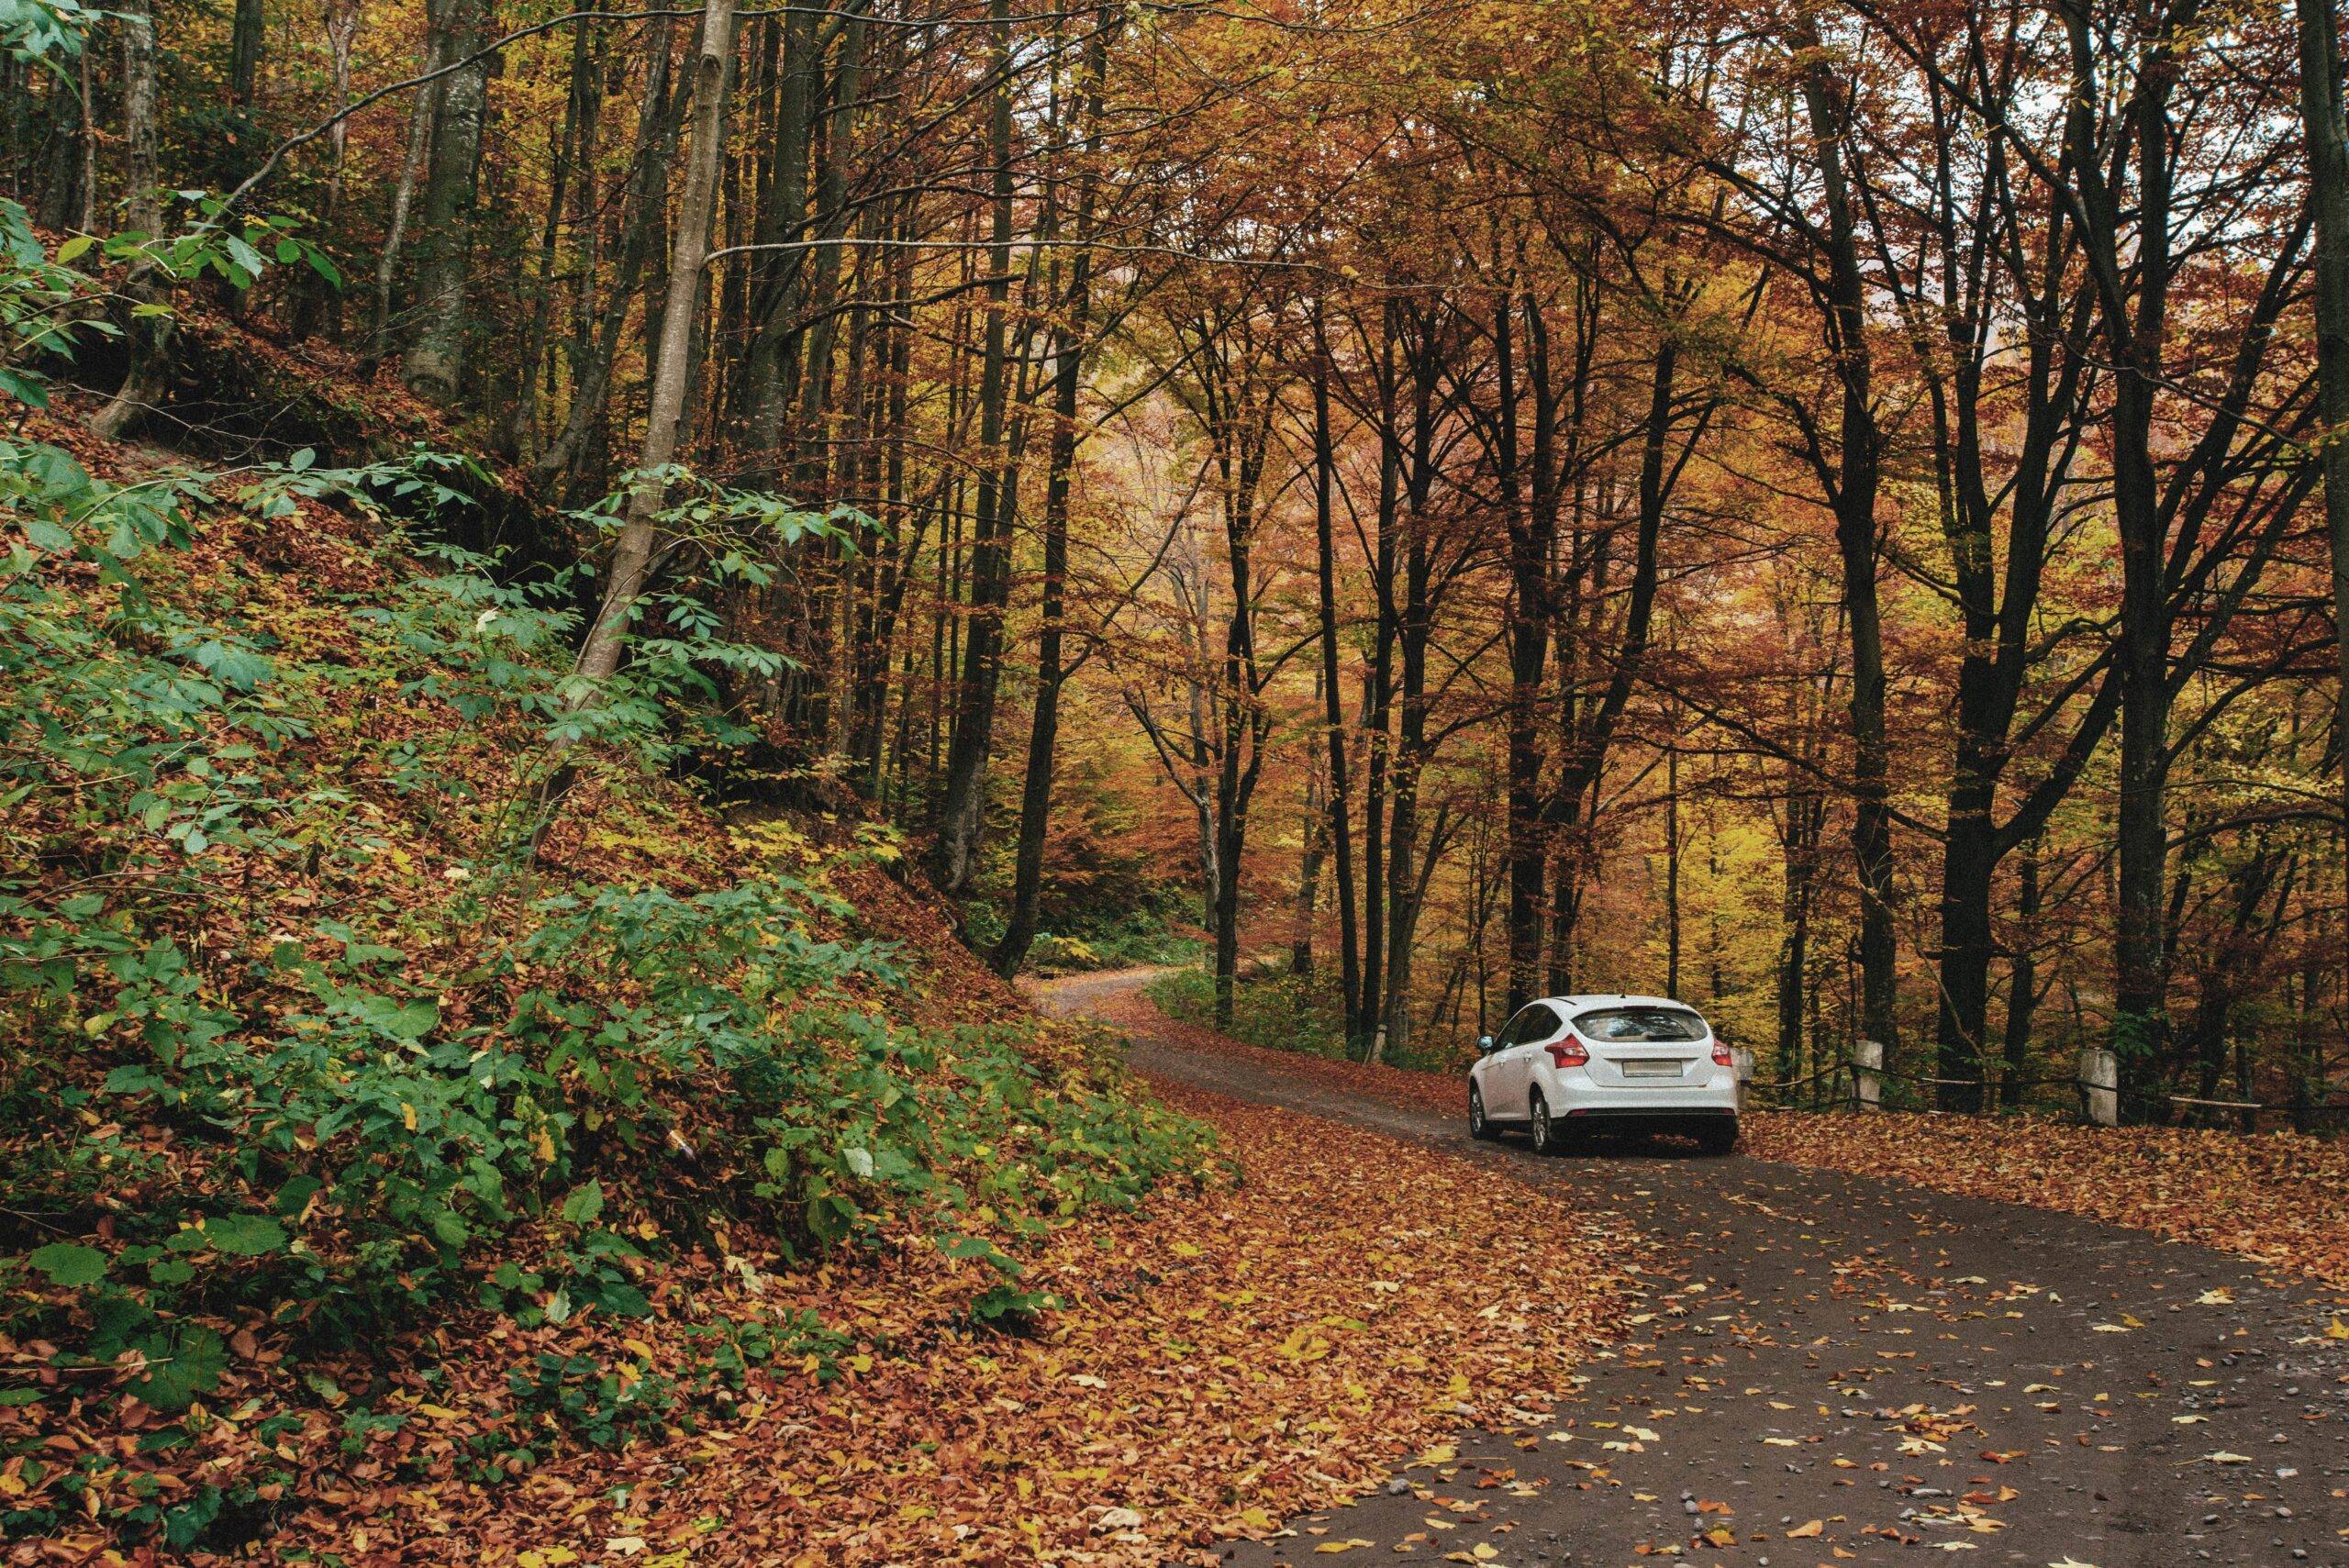 A white car driving on a forest road lined by trees and leaves